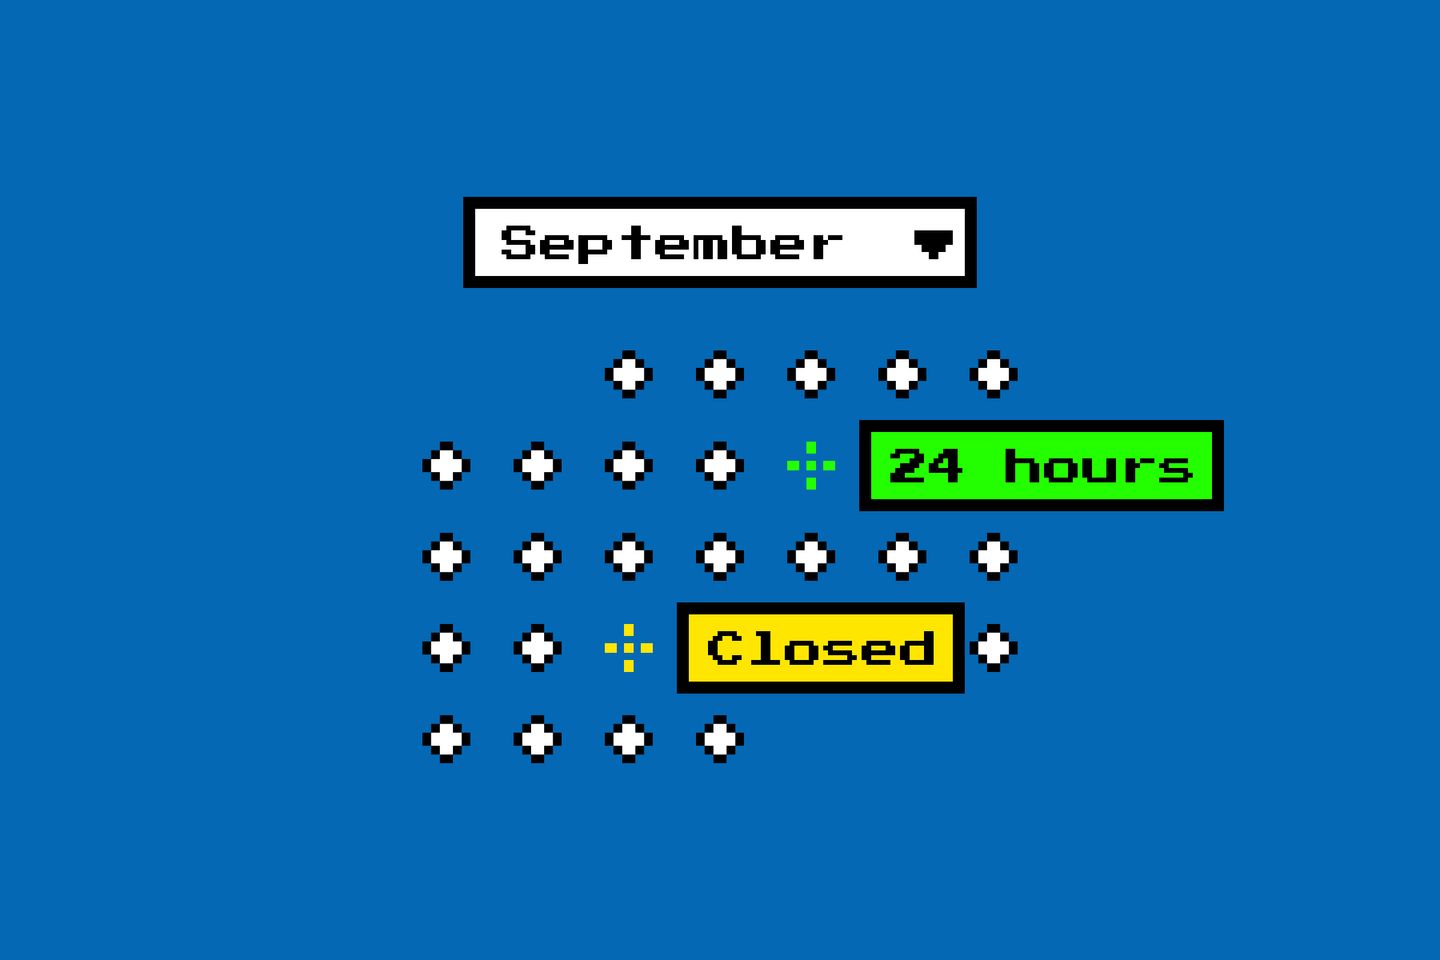 Illustration of a calendar with two days highlighted, one marked “24 hours” and the other marked “Closed”